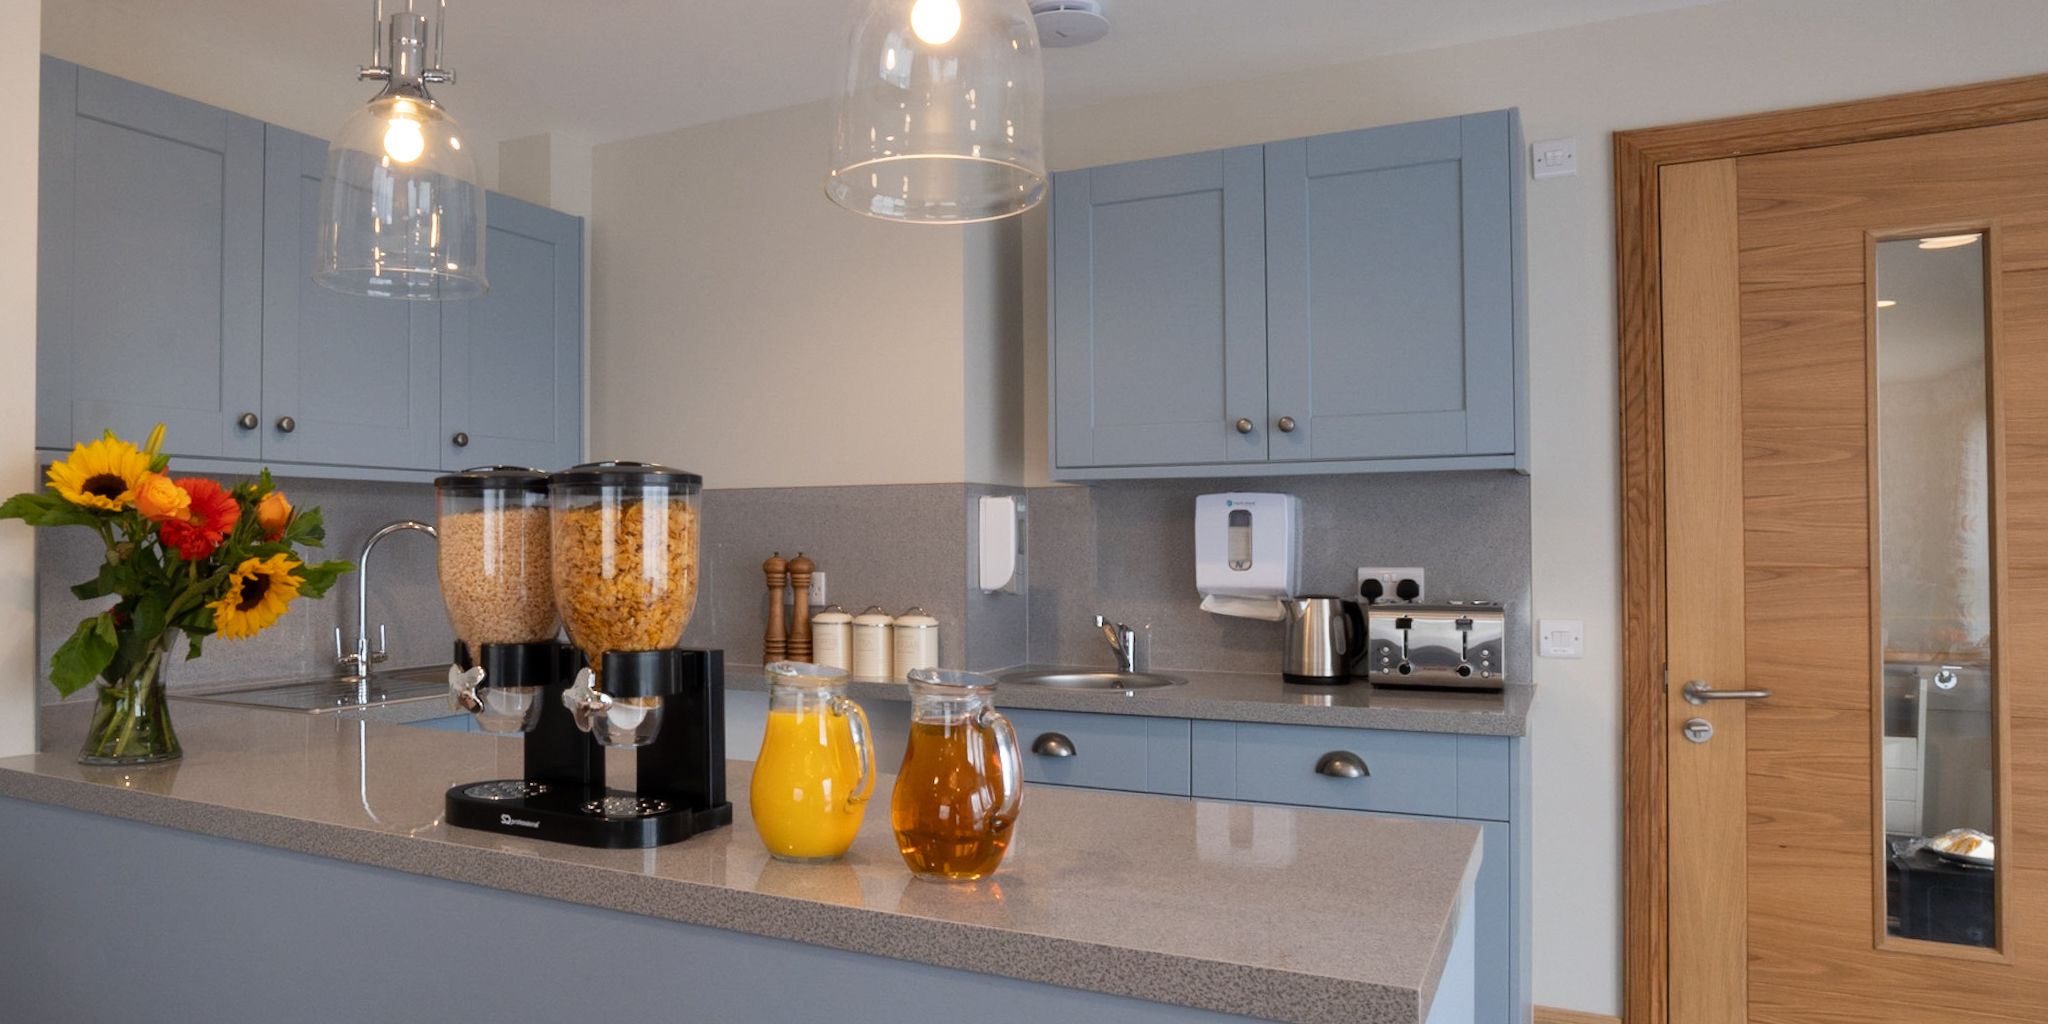 Kitchenette with Cereal Dispensers & Jug of Juices